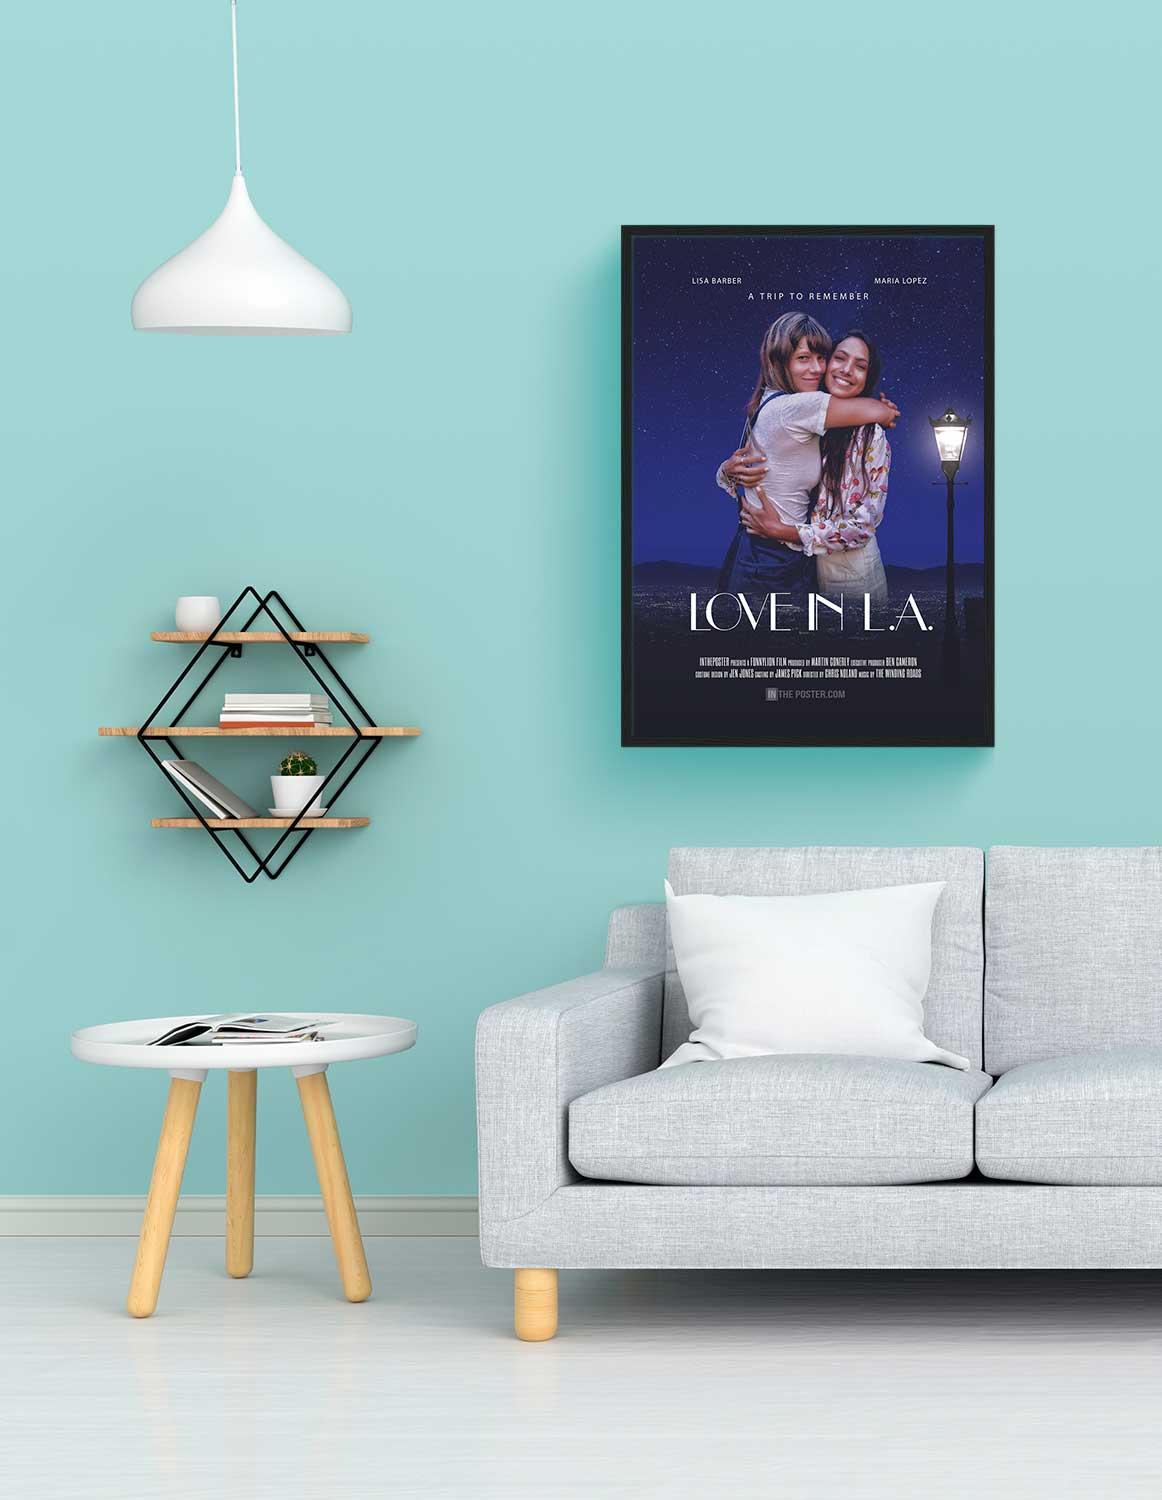 Love In LA romantic movie poster in a black frame, on the wall above a grey sofa